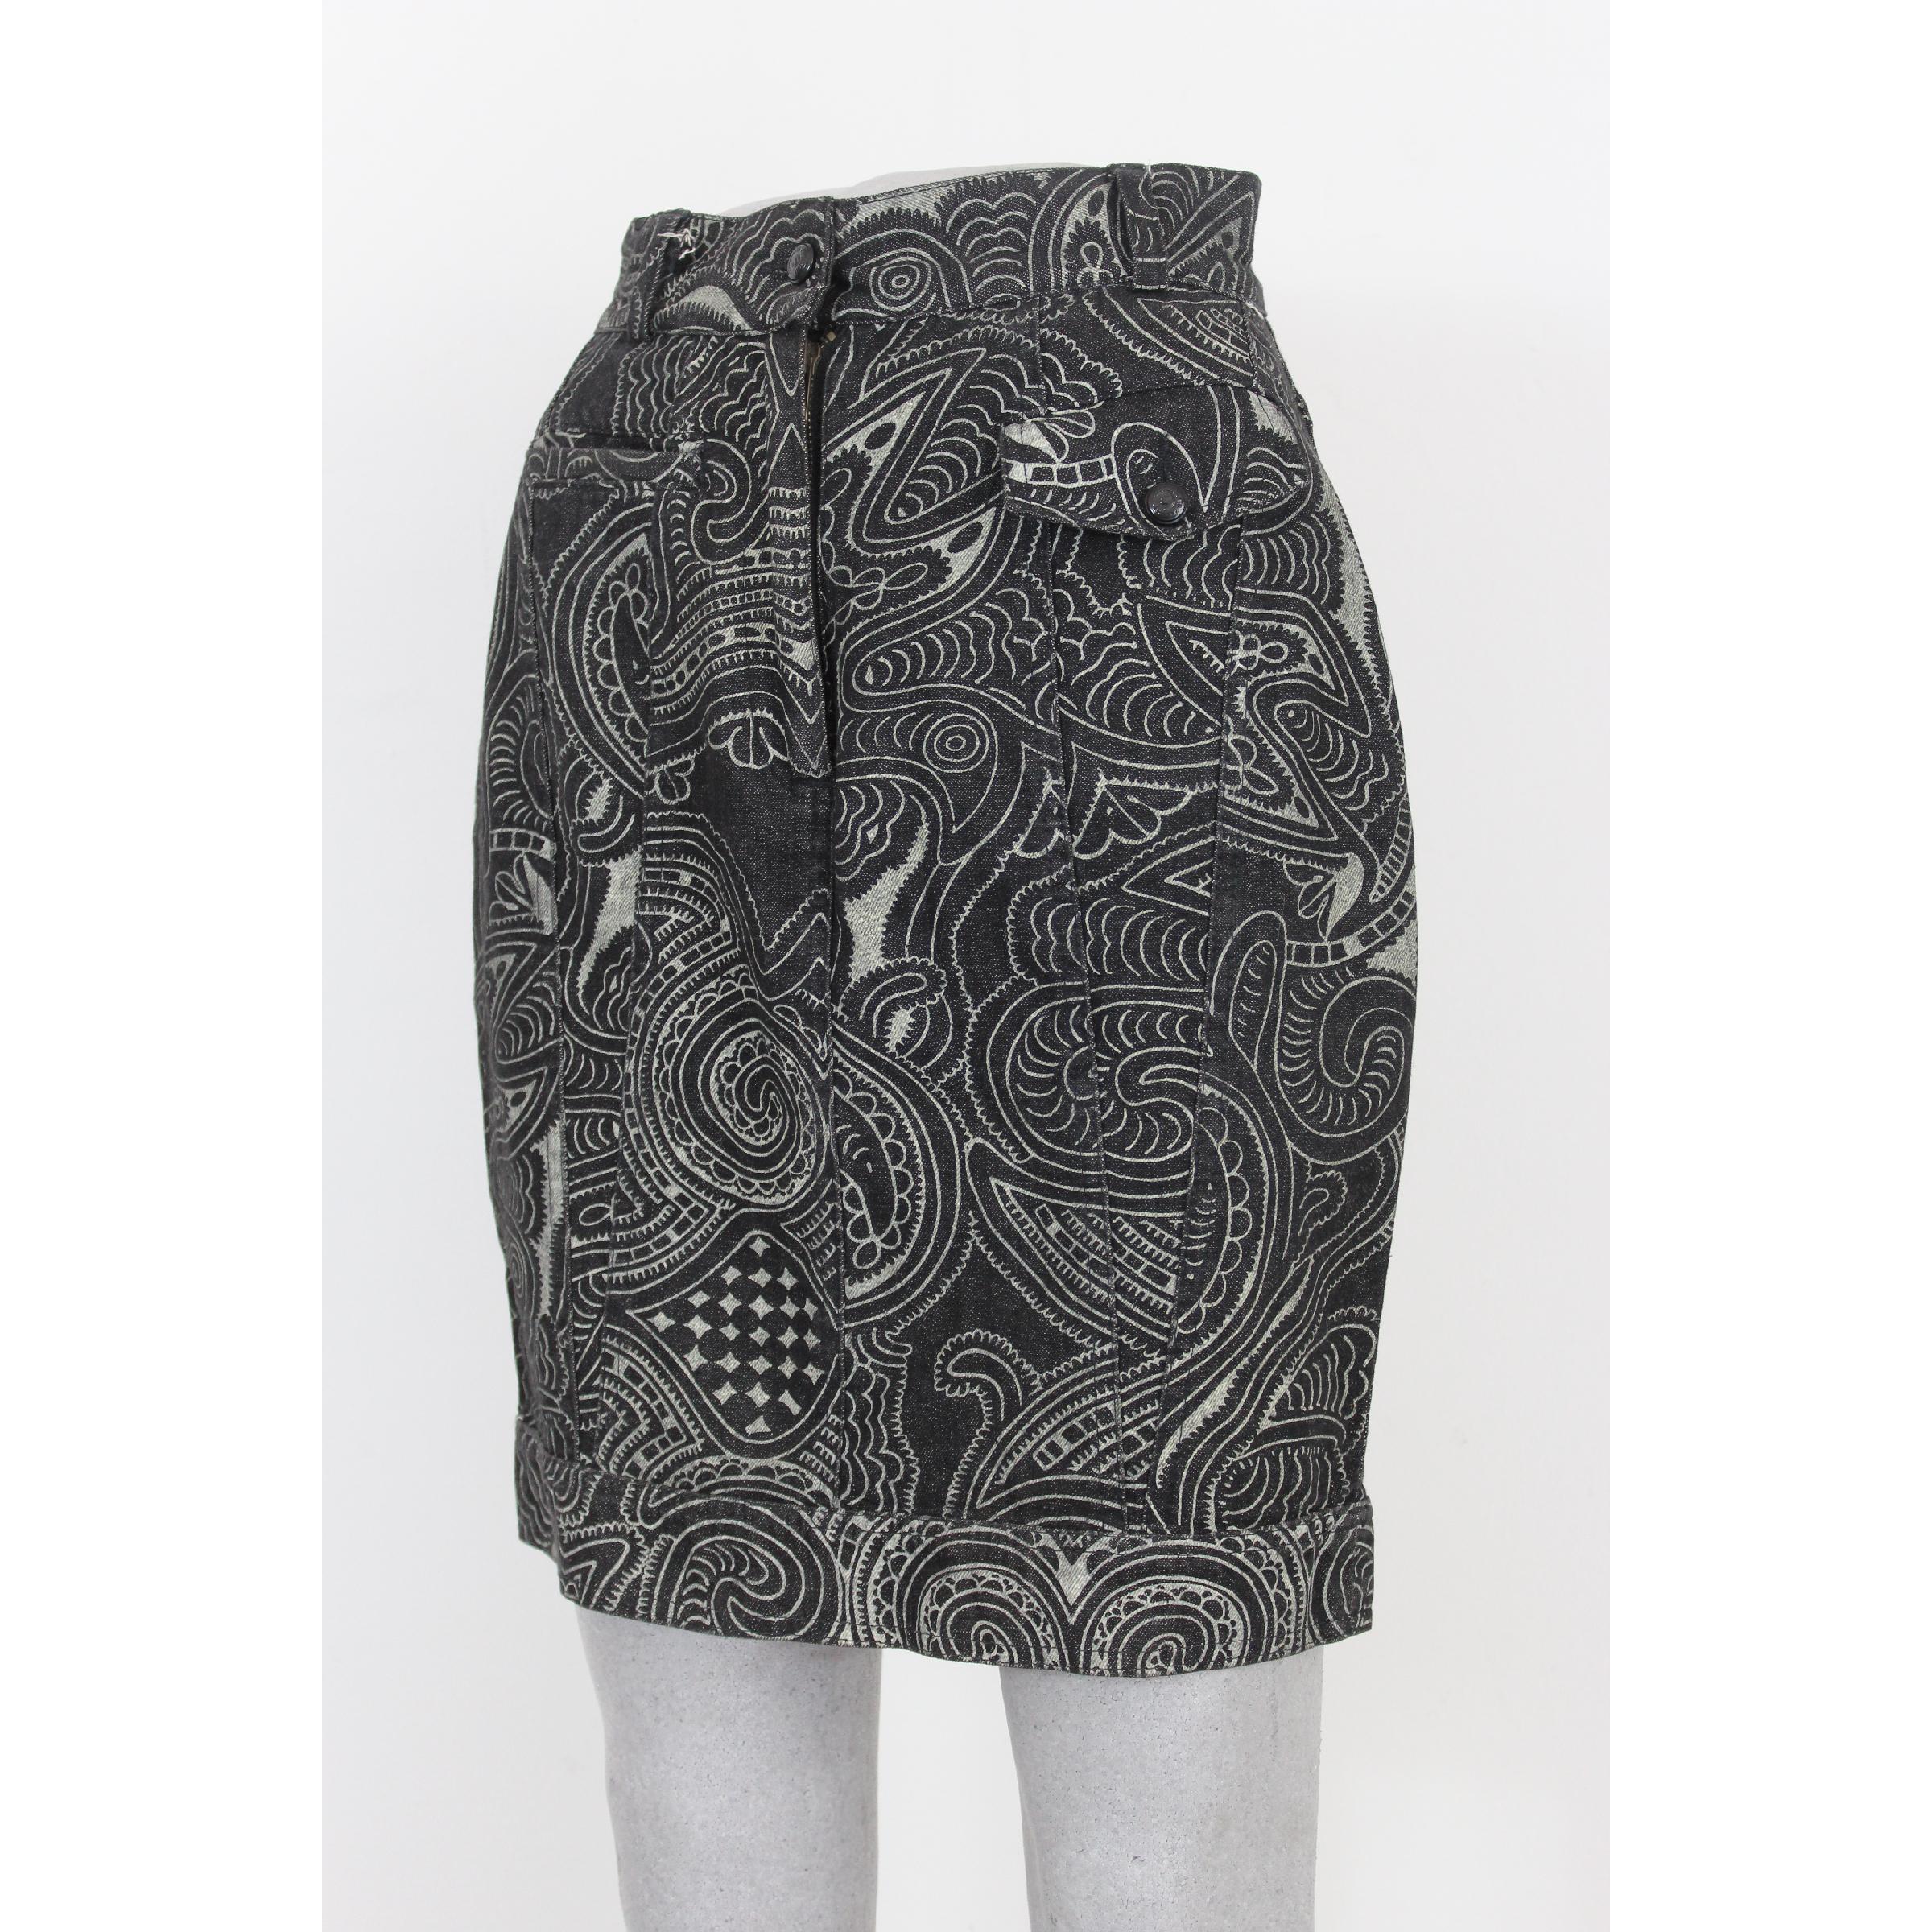 Moschino vintage short skirt. Black with white floral designs, 100% cotton jeans. 80s. Made in Italy. Excellent vintage condition.

Size: 42 It 8 Us 10 Uk

Waist: 32 cm
Length: 53 cm